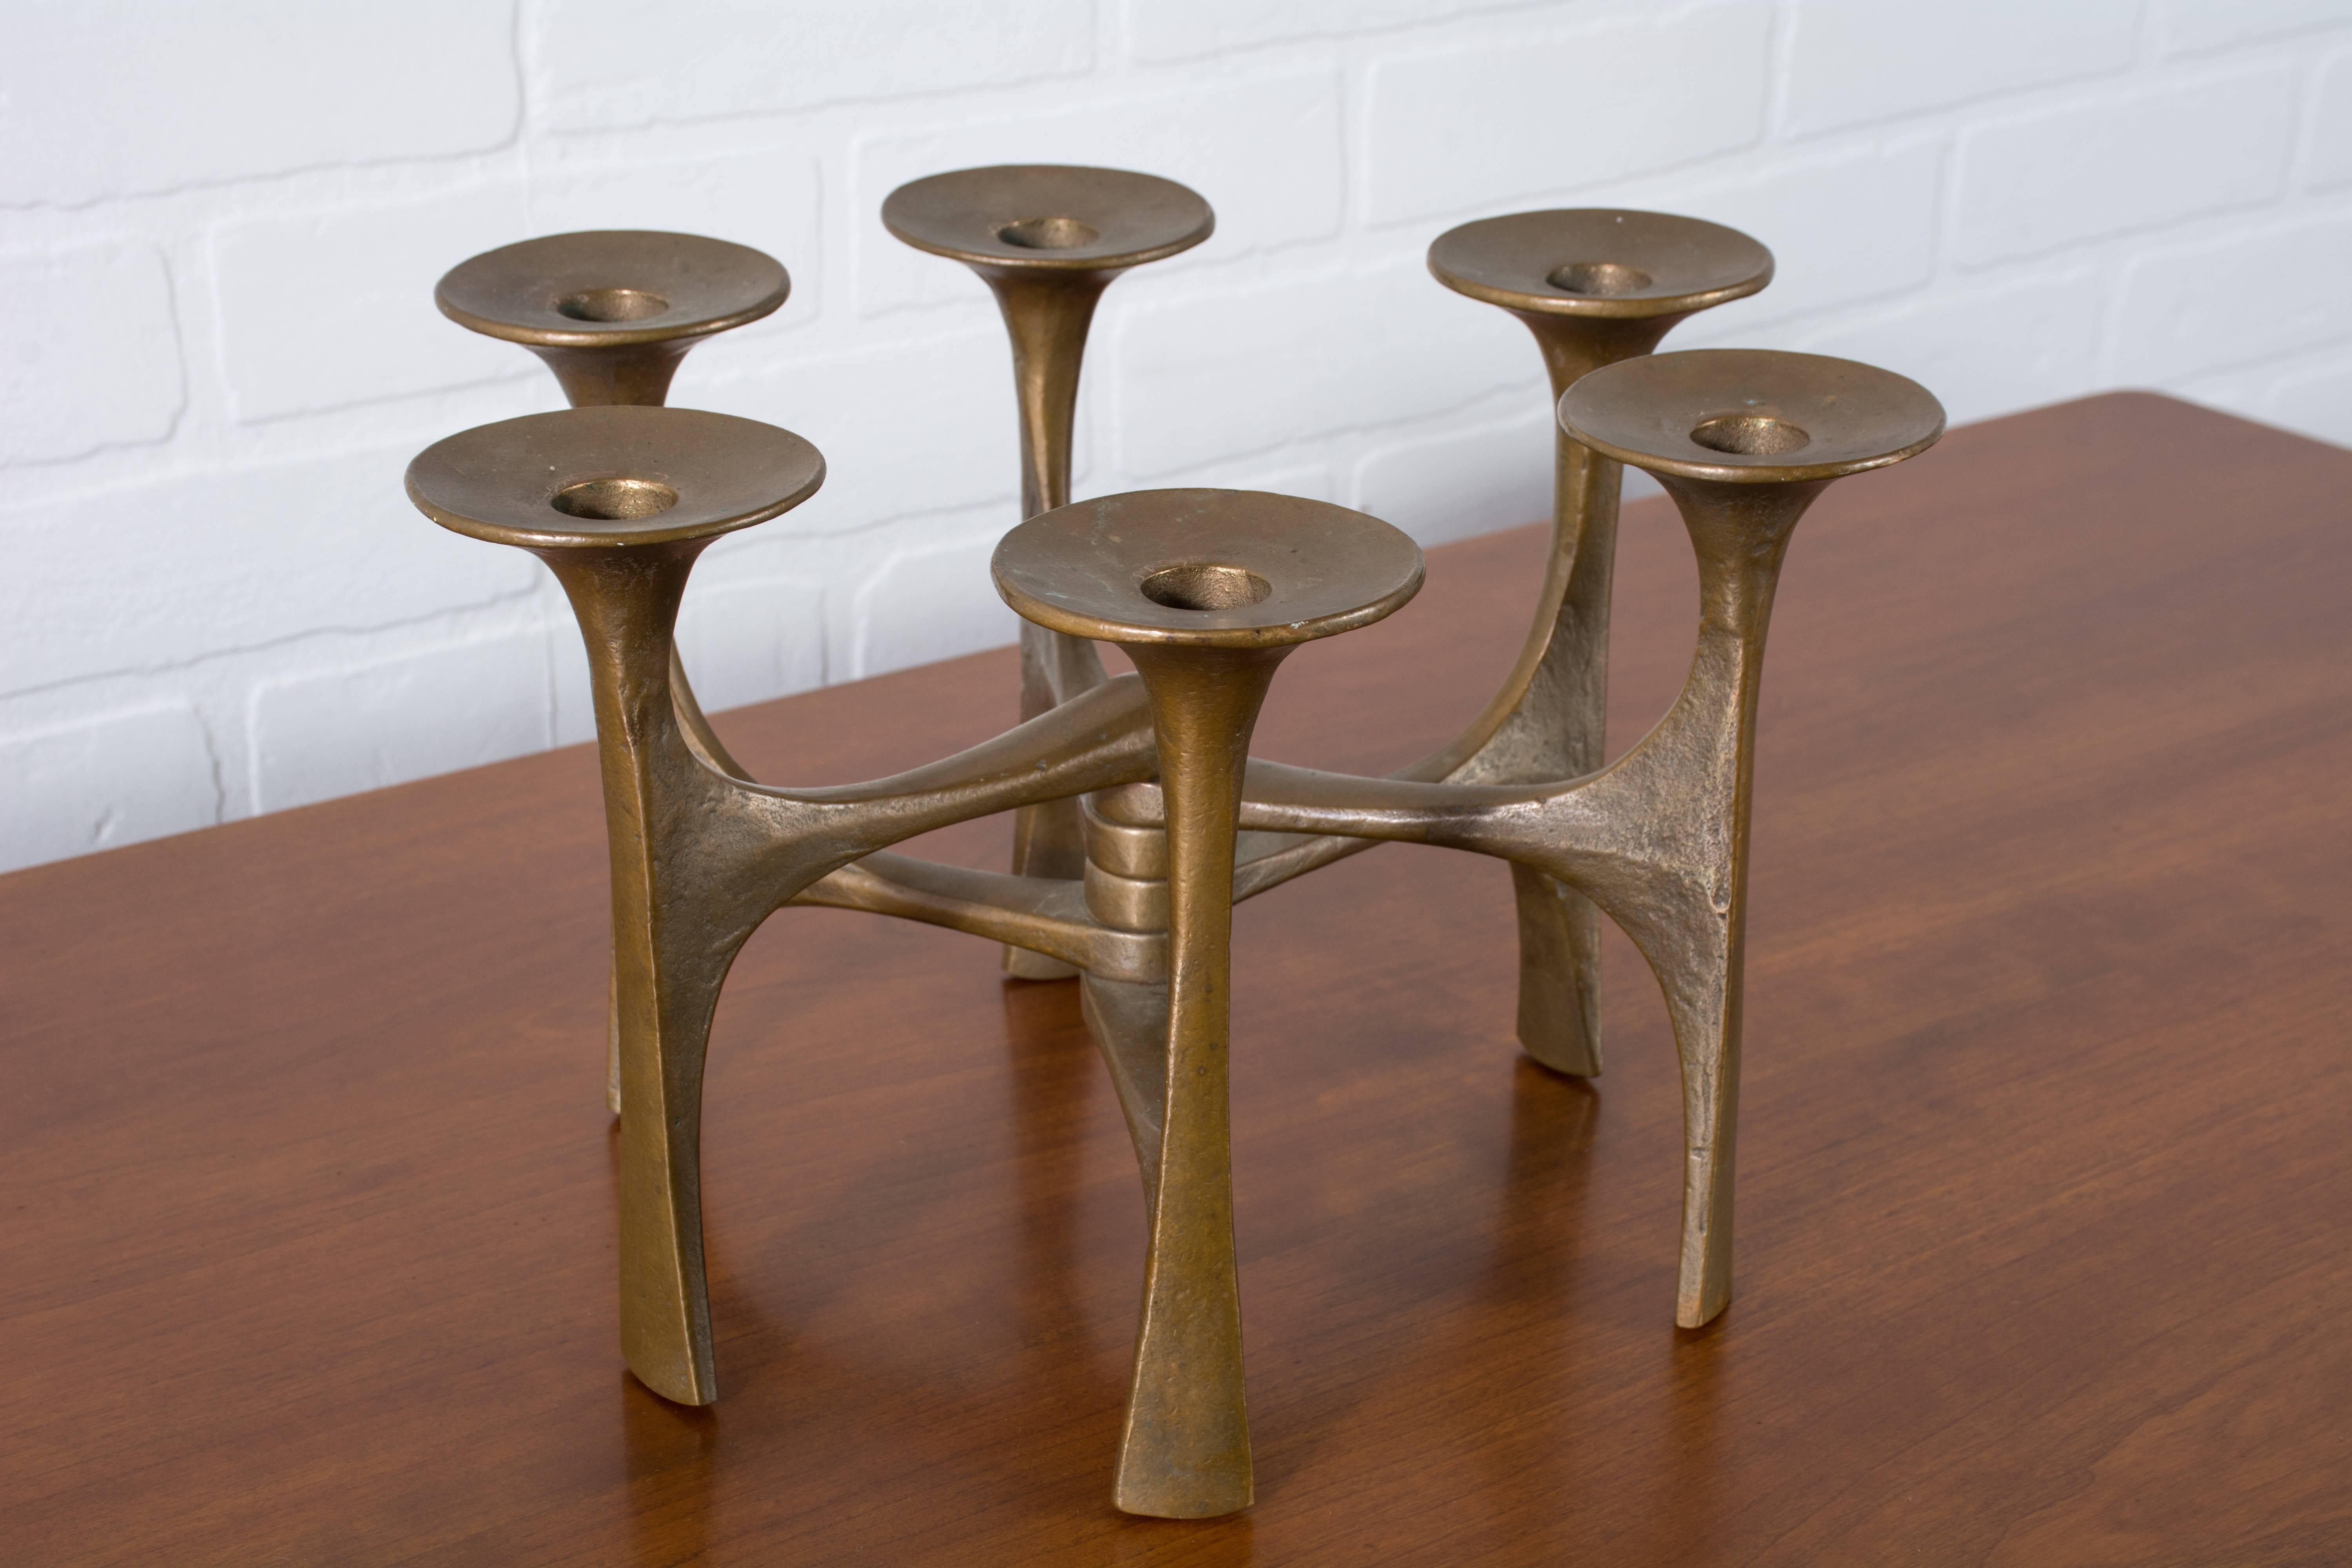 This vintage Mid-Century cast bronze candle holder was designed by Michael Harjes (1926-2006) for Harjes-Metallkunst, Germany, circa 1960s. Holds six candles. Marked with maker's stamp on one of the arms.